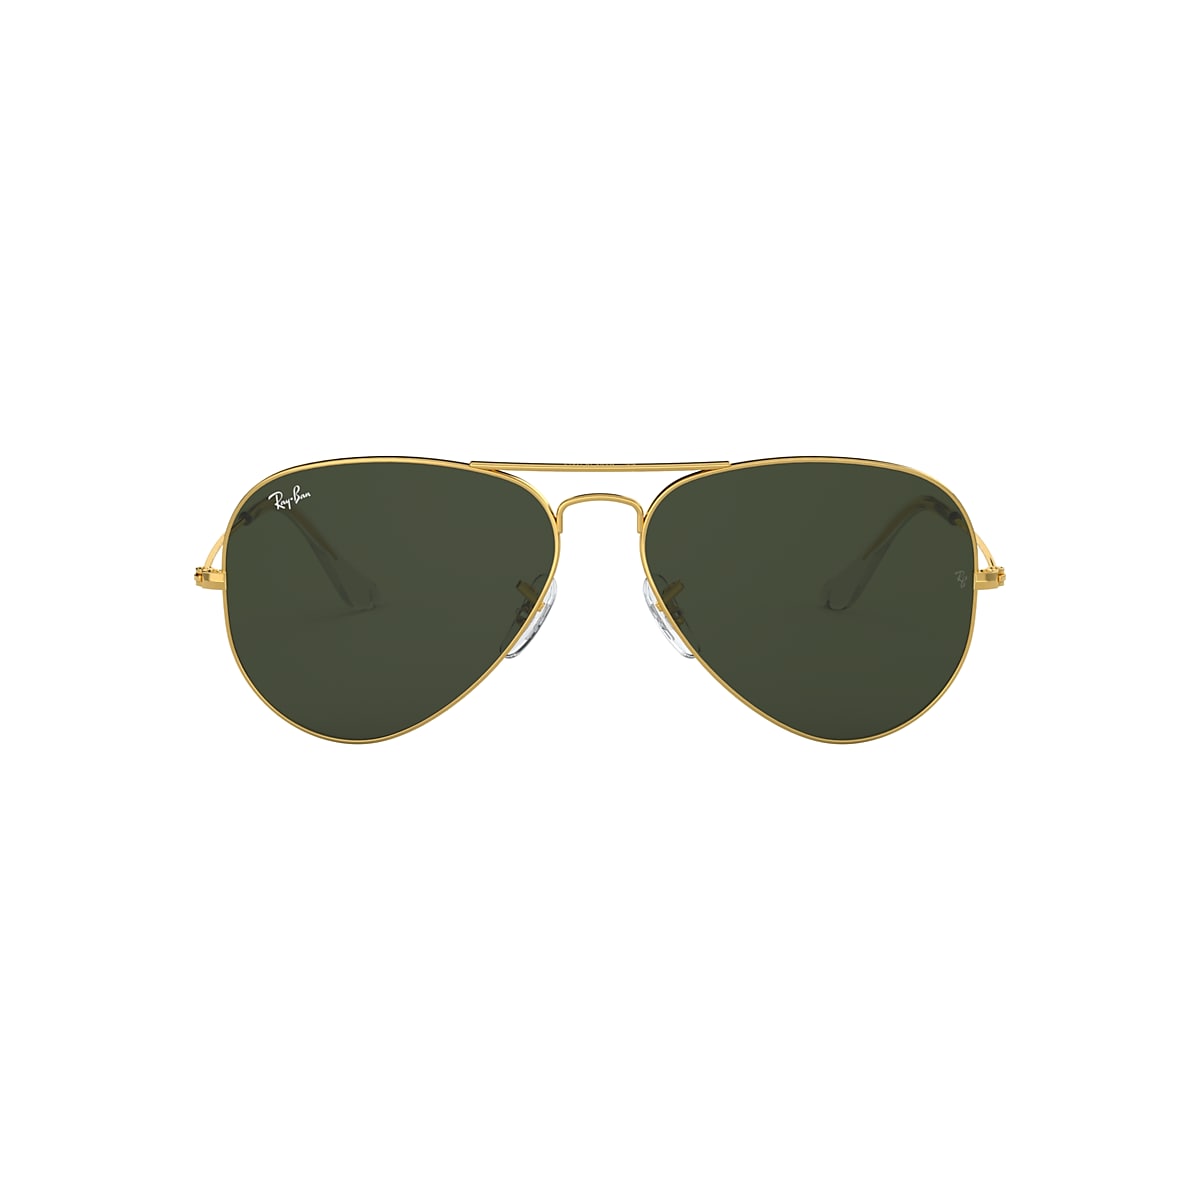 Ray-Ban 0RB3025 Sunglasses in Gold | Target Optical